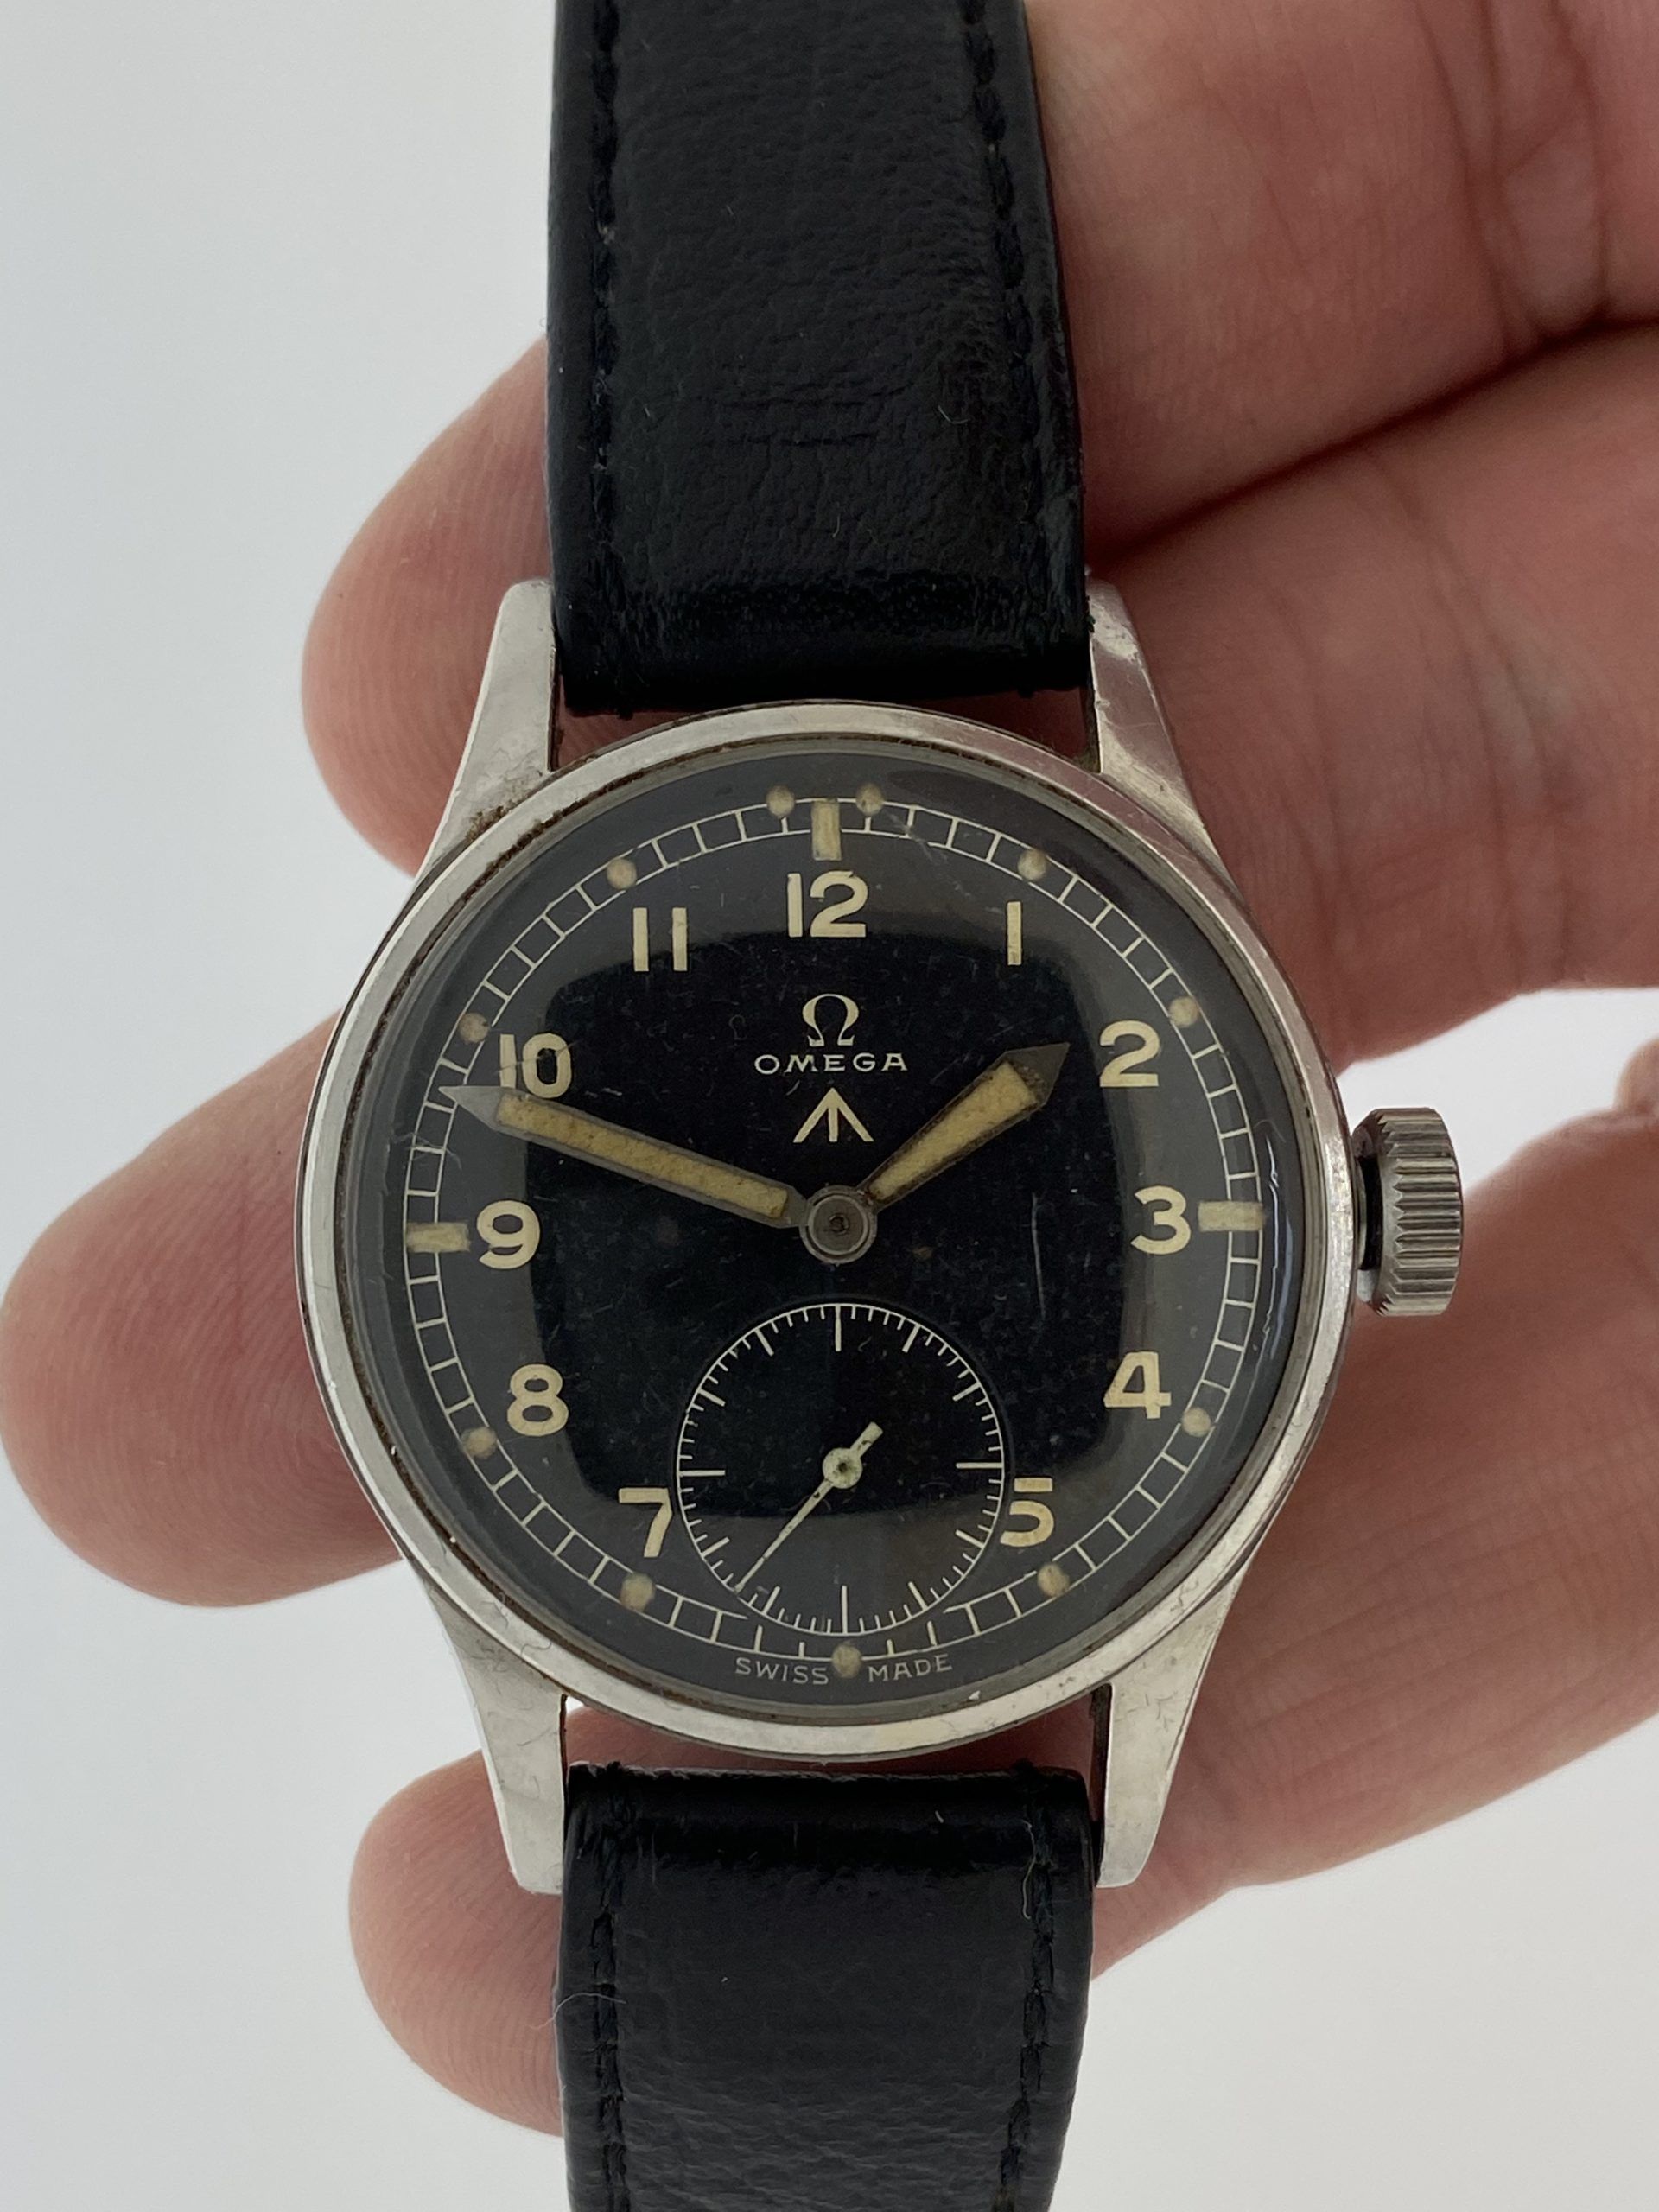 1944 D-Day Military Omega WWW Dirty 